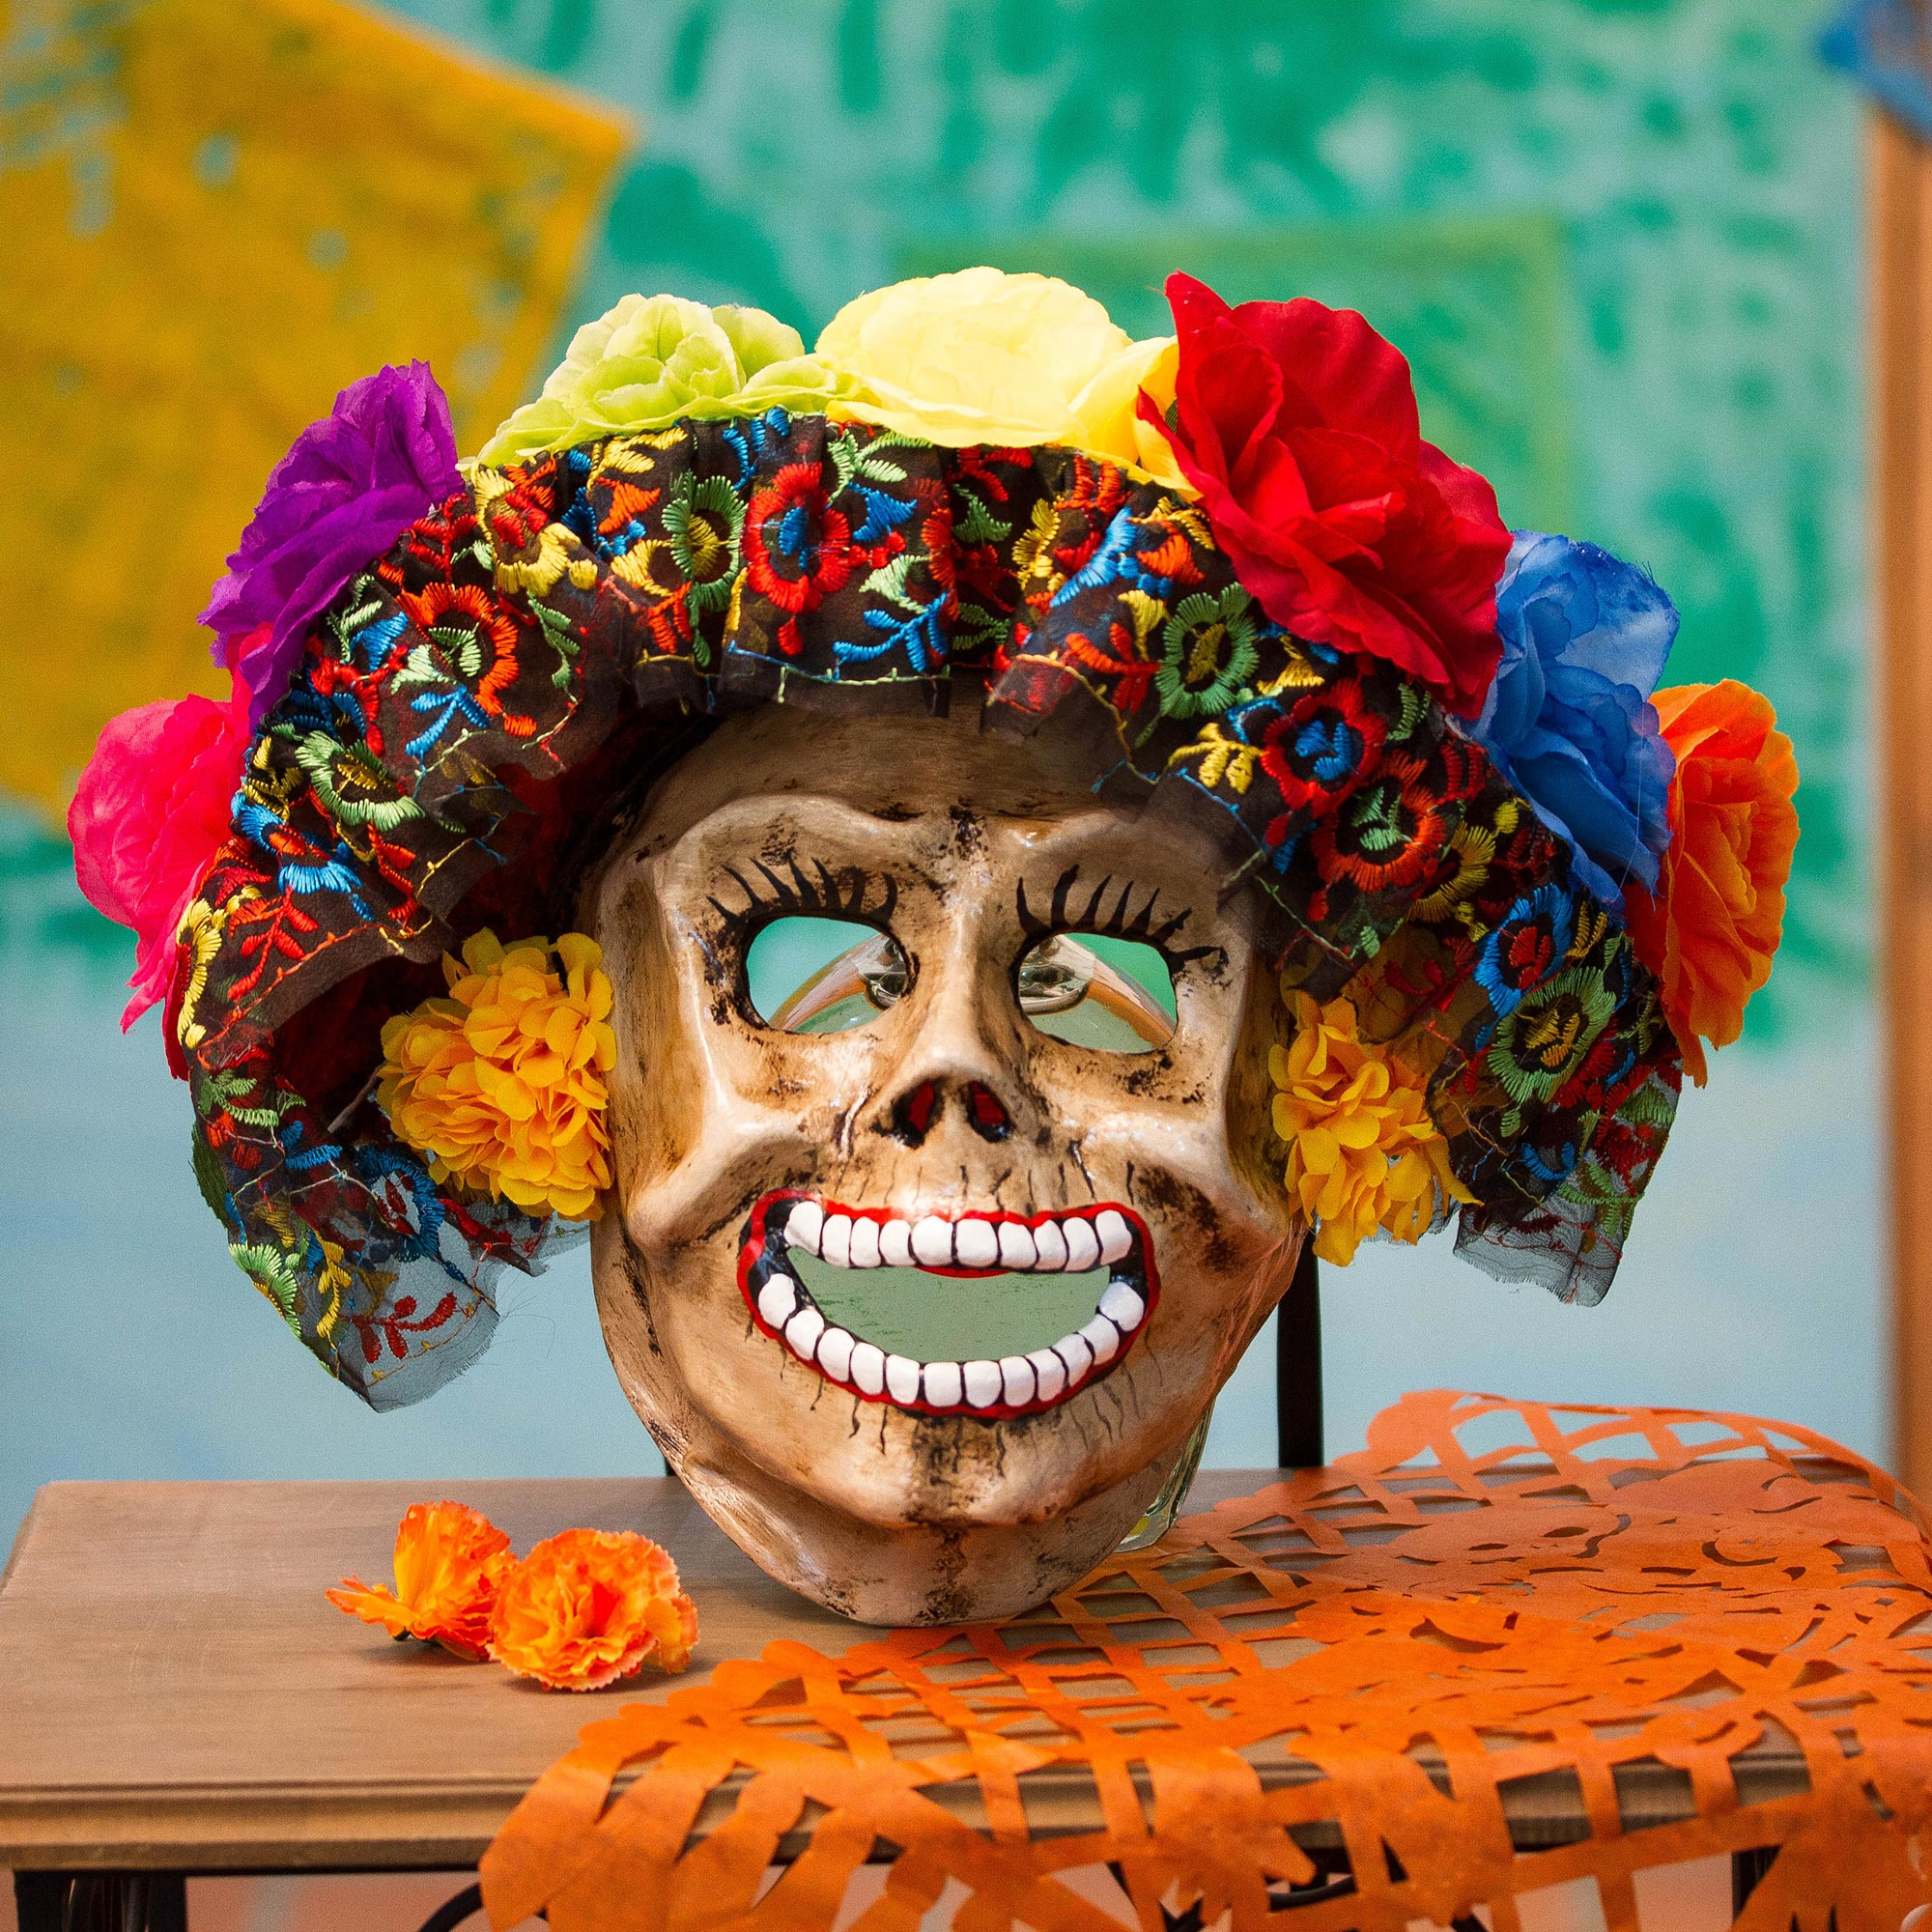 Contemporary Papier Mache: Colorful Sculpture, Jewelry, and Home Accessories